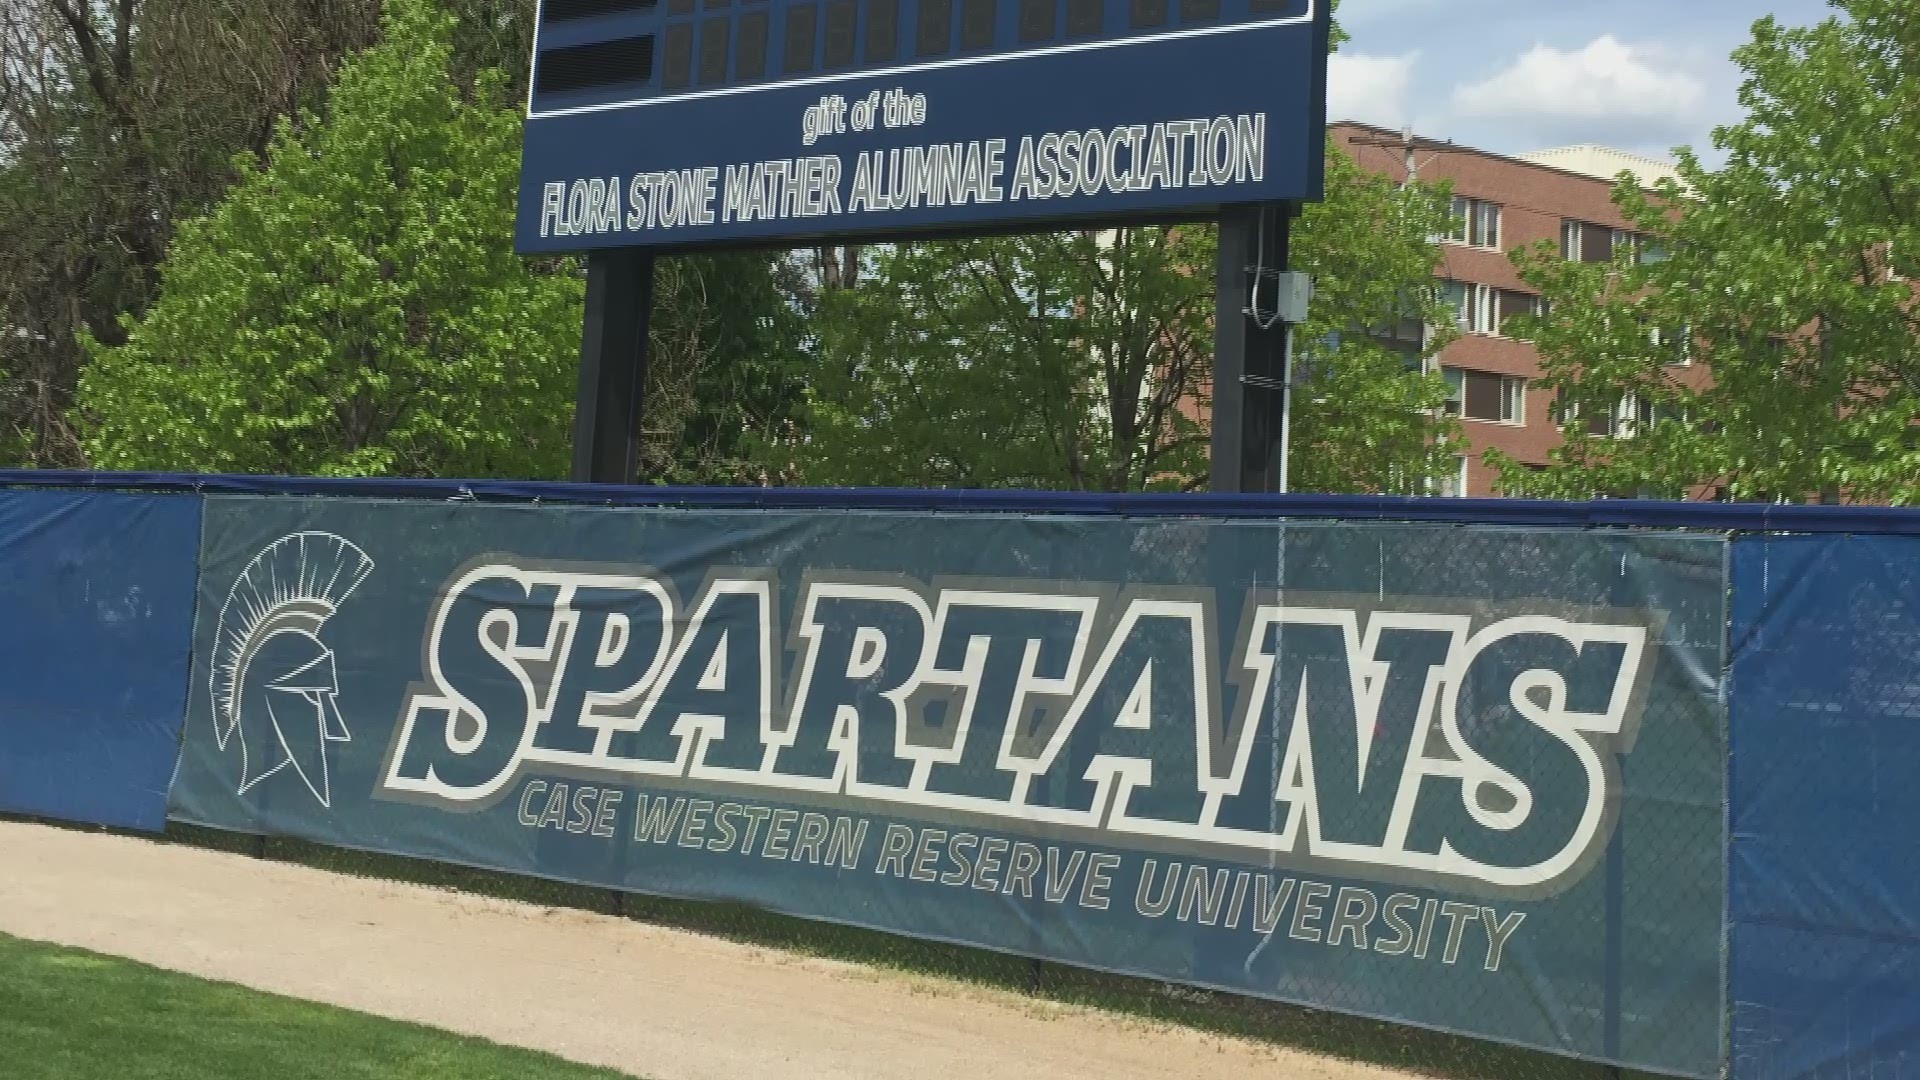 Case Softball Returns to NCAA Tournament after 17-year absence